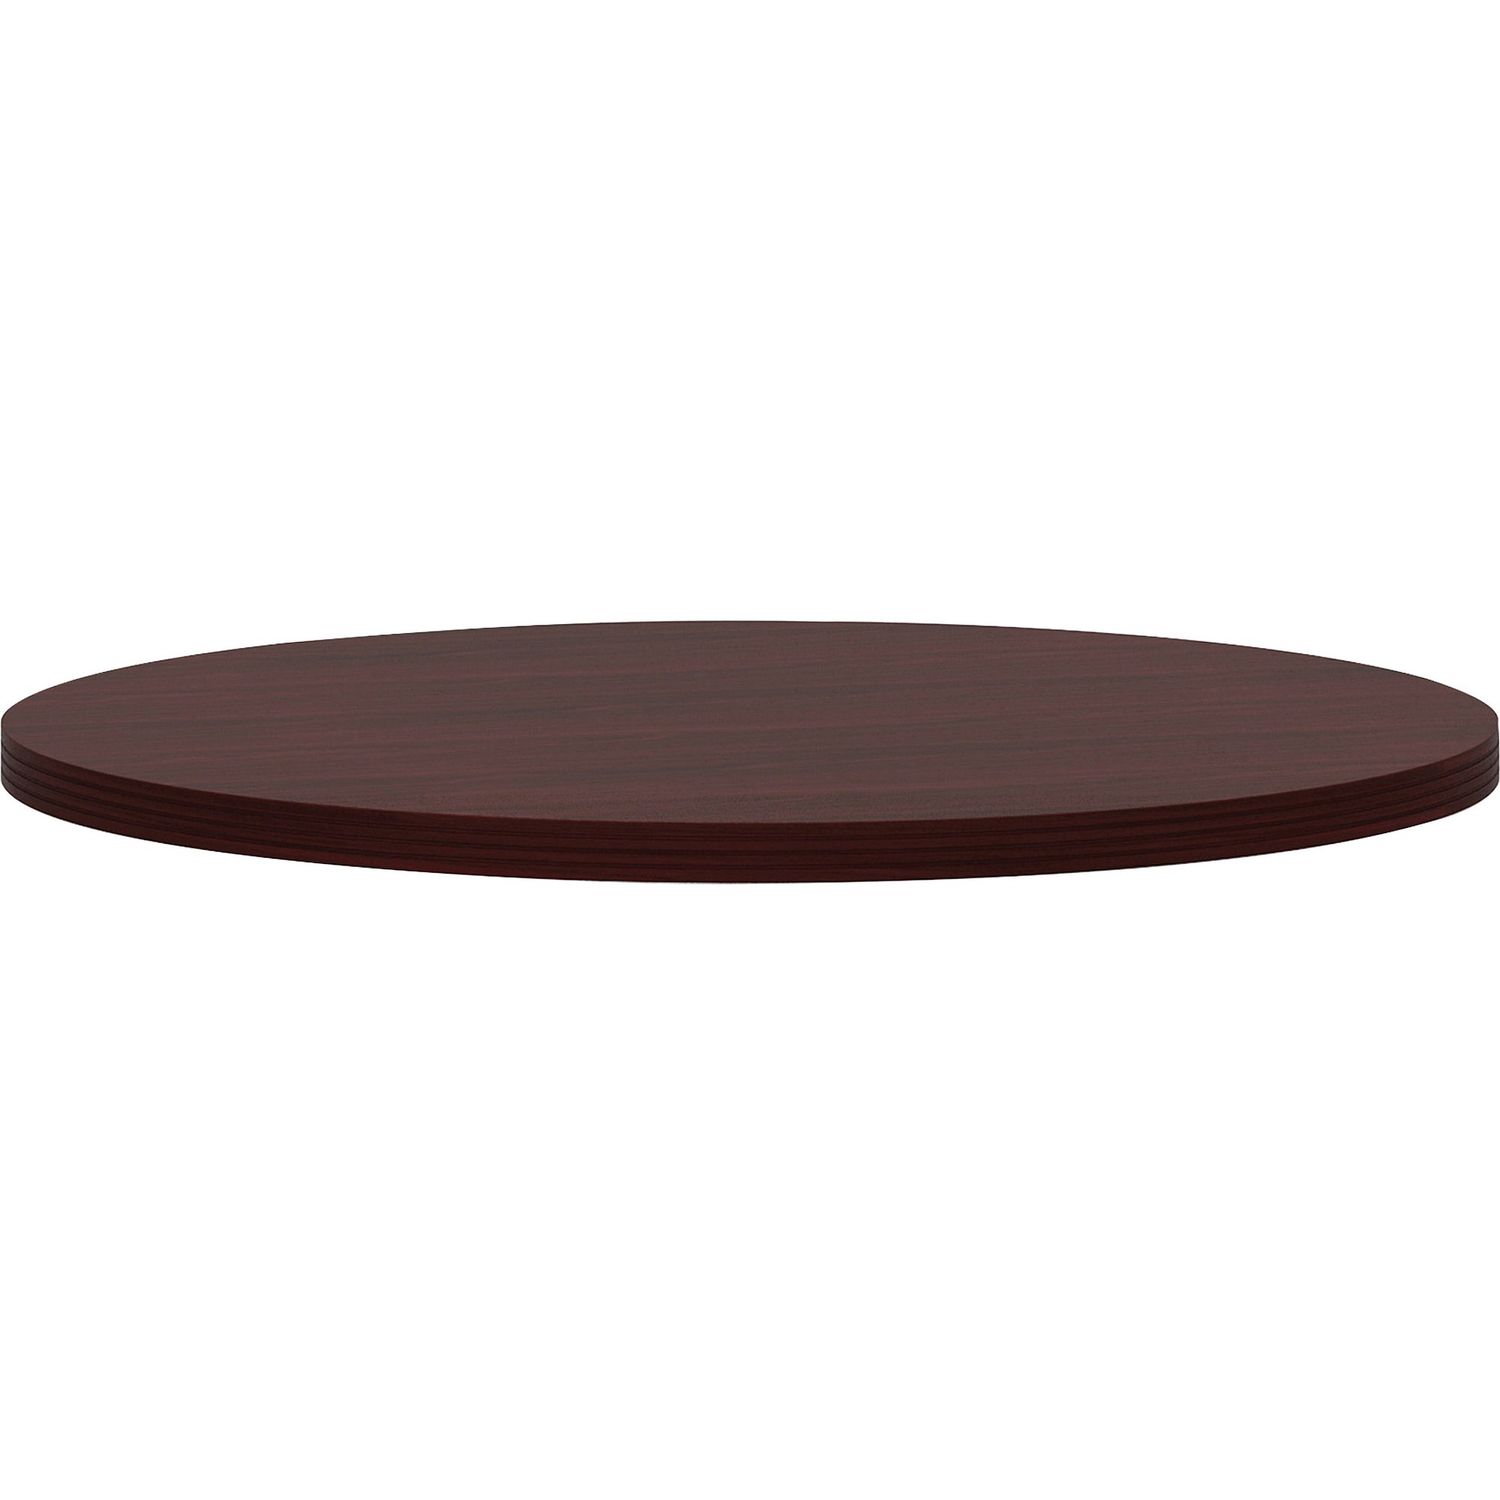 Preside Round Table Top 42"D, Round Top, 1.13" Table Top Thickness x 42" Table Top Diameter, Assembly Required, Laminated, Mahogany